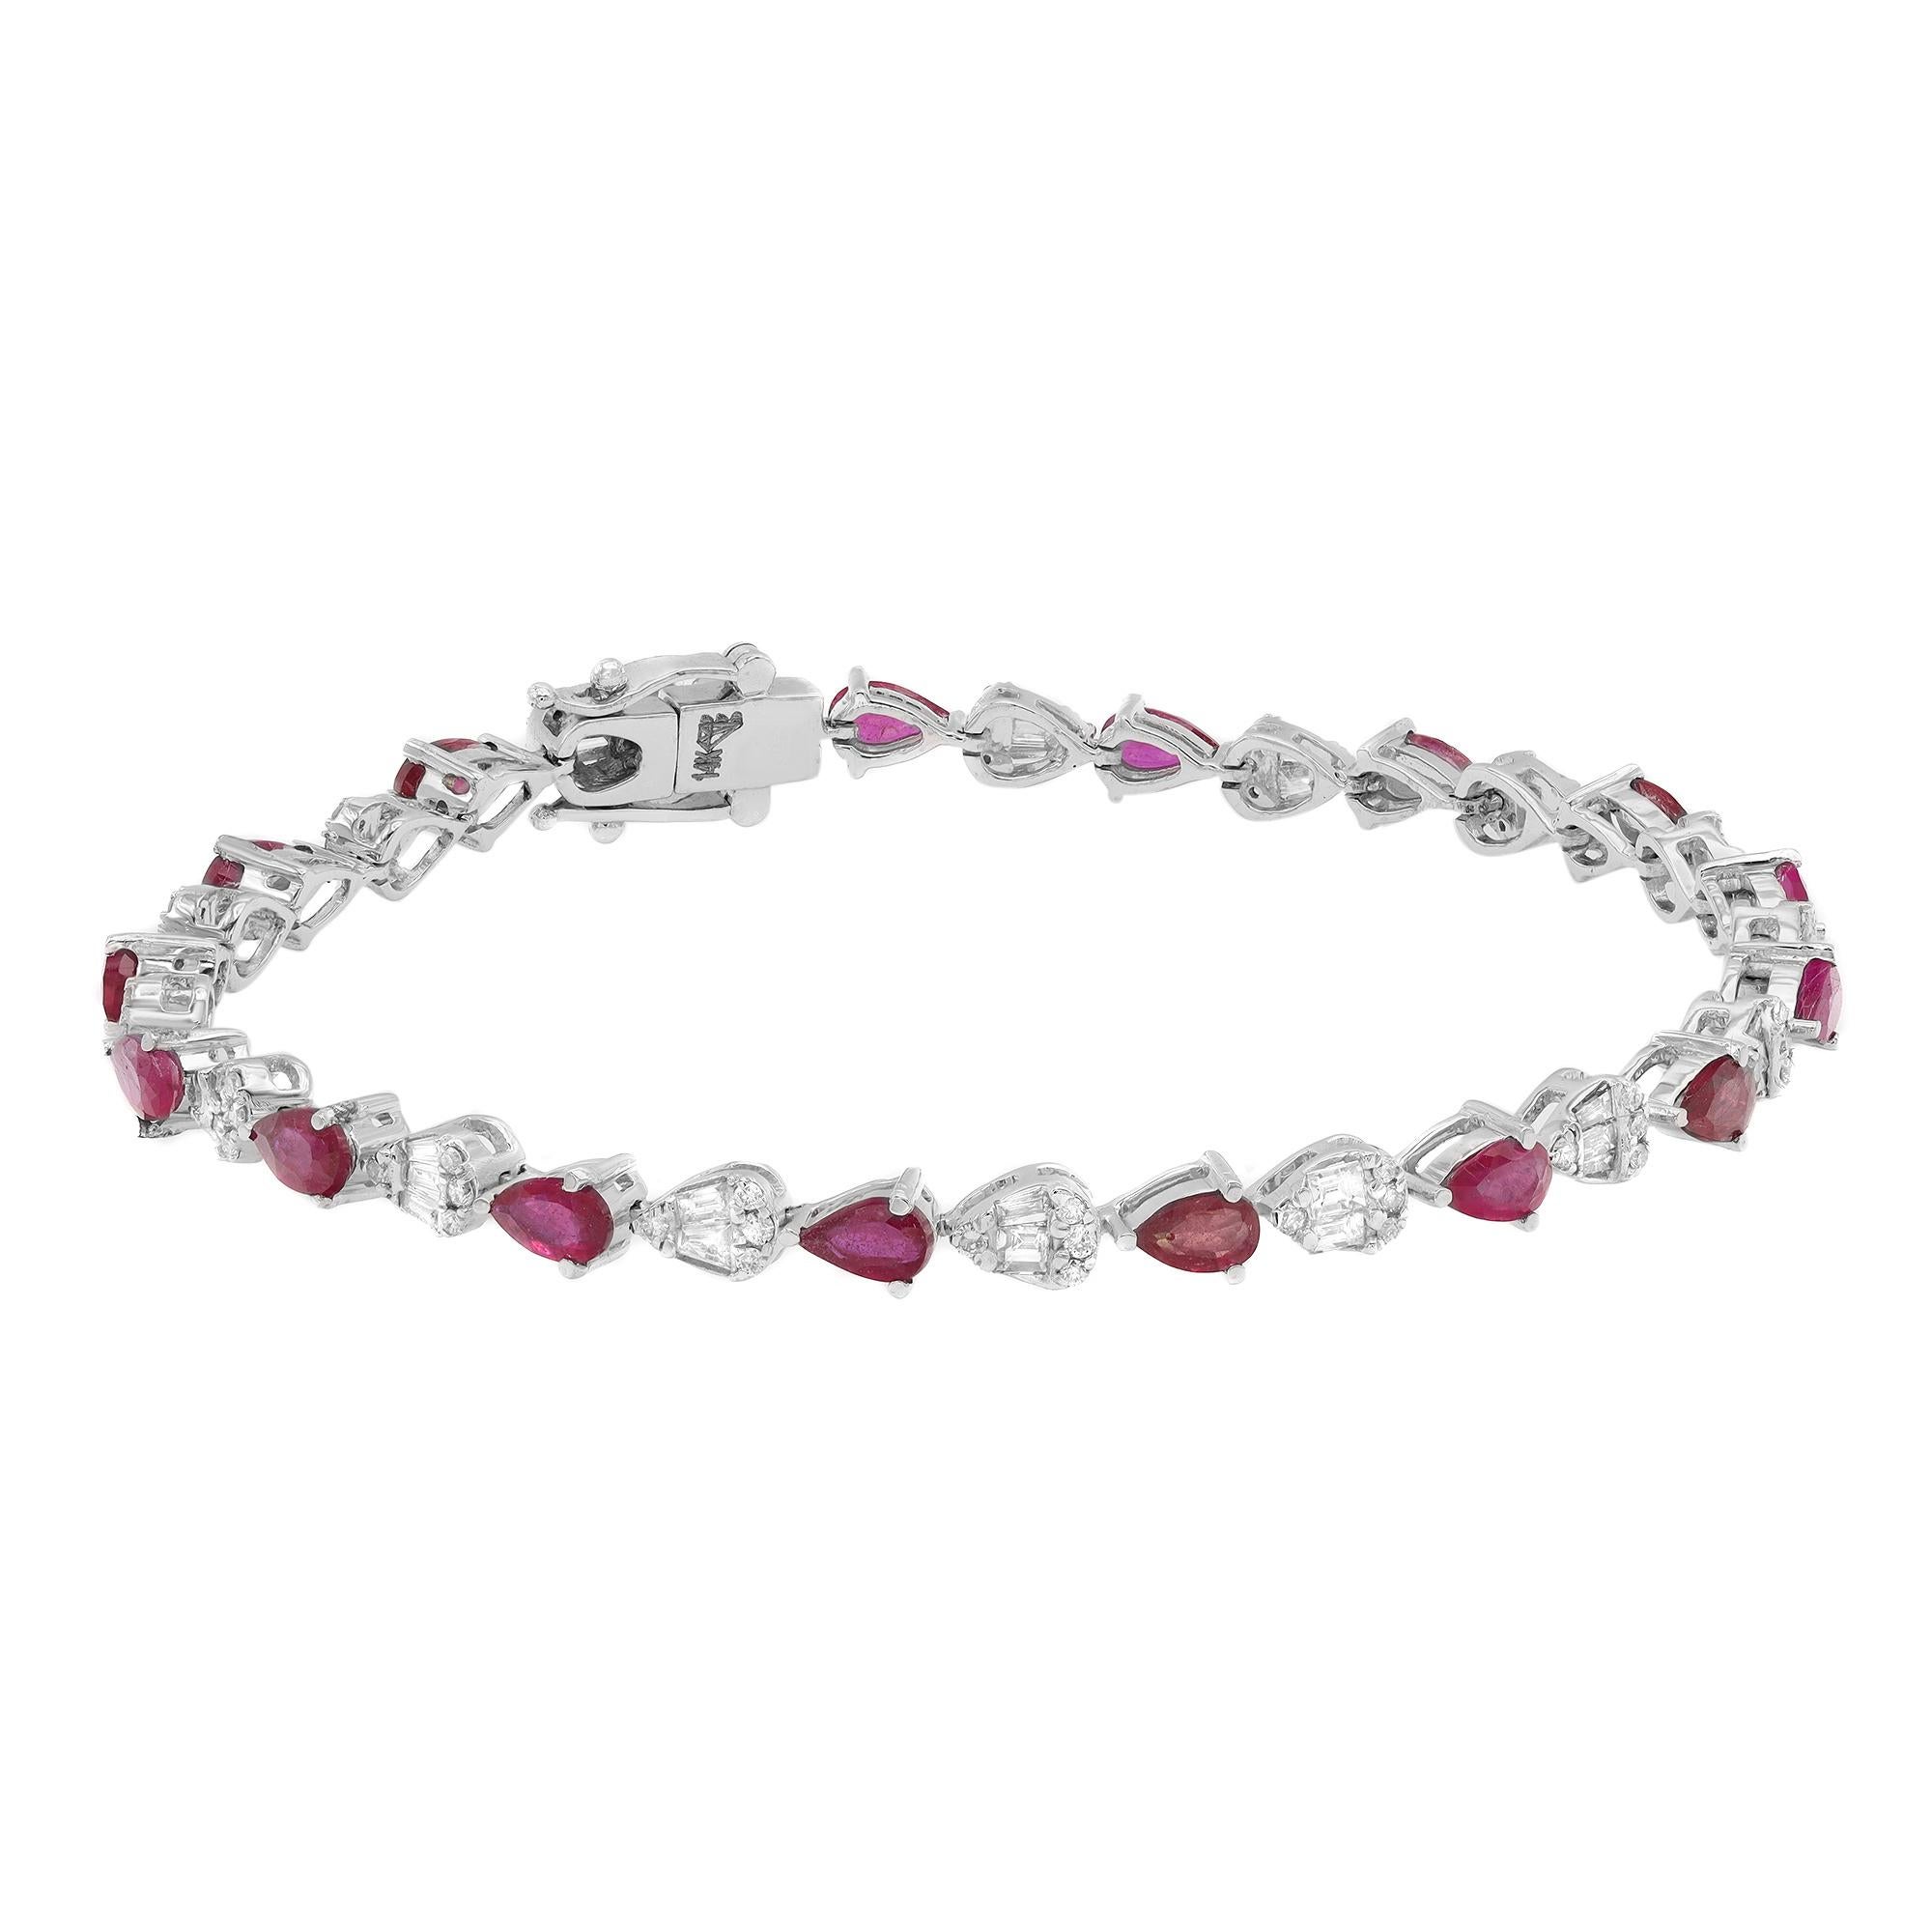 This beautifully crafted tennis bracelet features pear shaped Rubies with Baguette and round cut diamonds in prong and channel setting. Crafted in 14k white gold. Total diamond weight: 1.58 carats. Diamond Quality: G-H color and SI clarity. Total